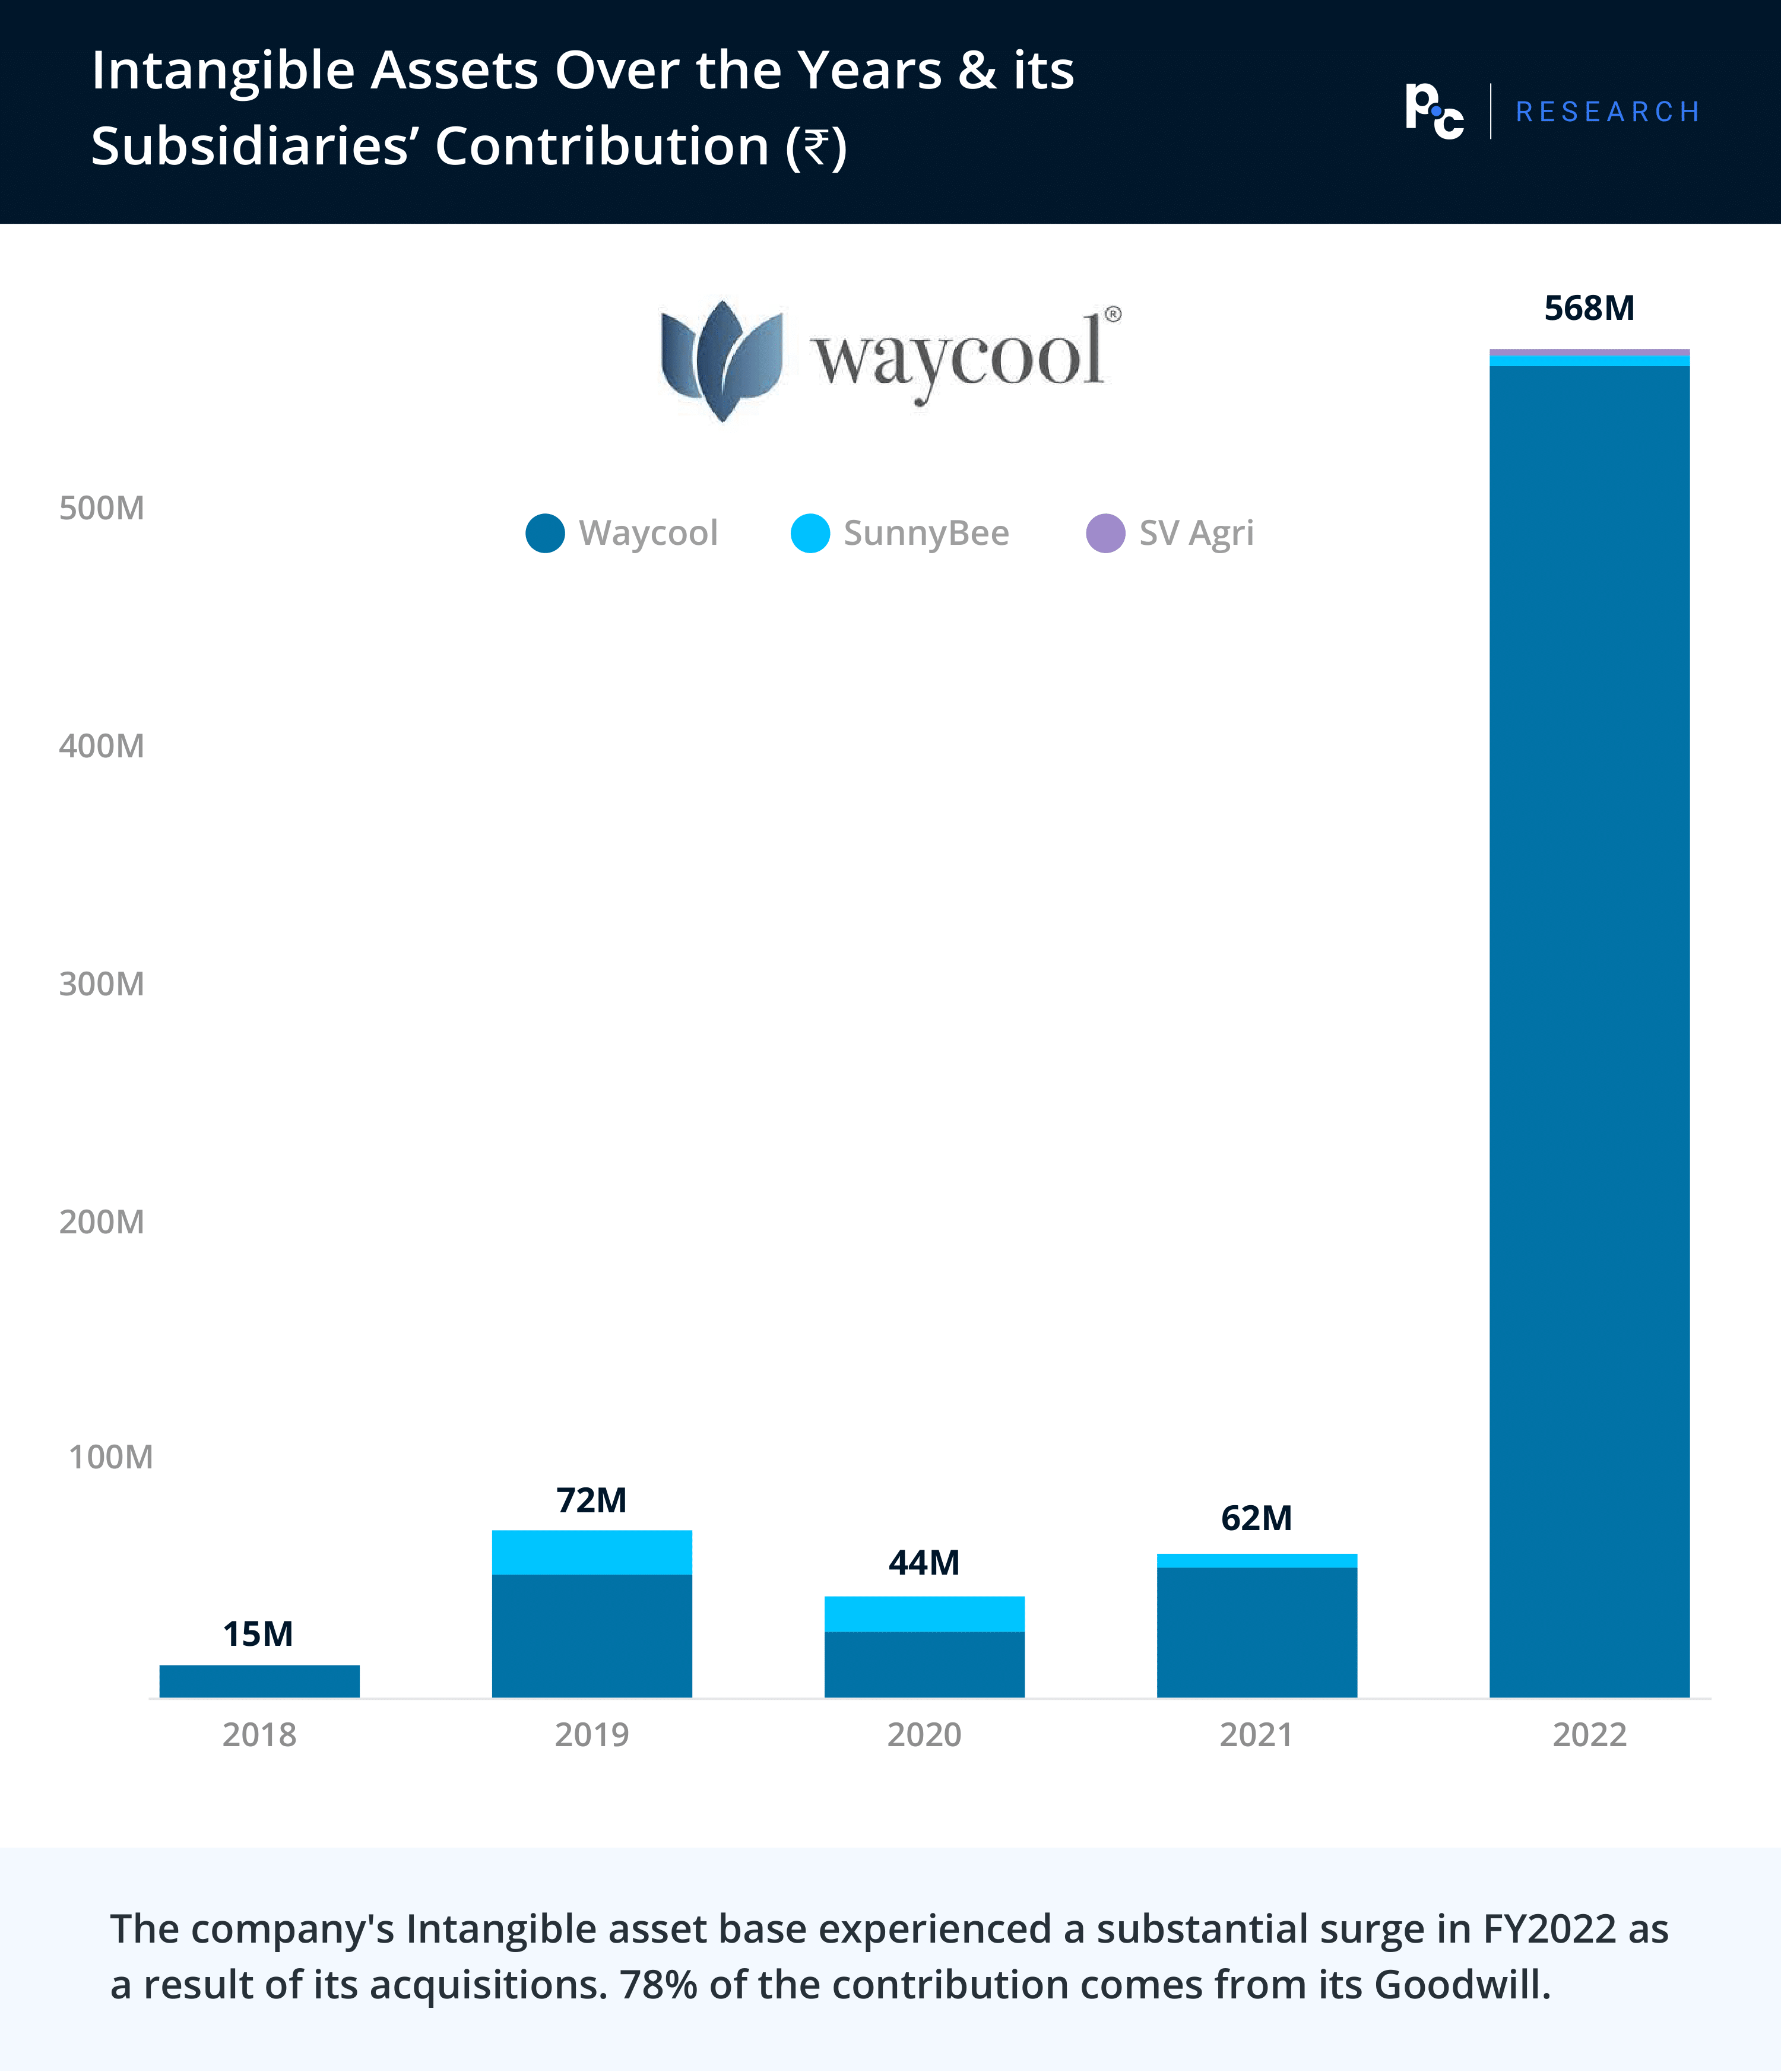 WayCool: Intangible Asset over 5 Years & Its Subsidiaries’ Contribution (₹)

The company's Intangible asset base experienced a substantial surge in FY2022 as a result of its acquisitions. 78% of the contribution comes from its Goodwill.
